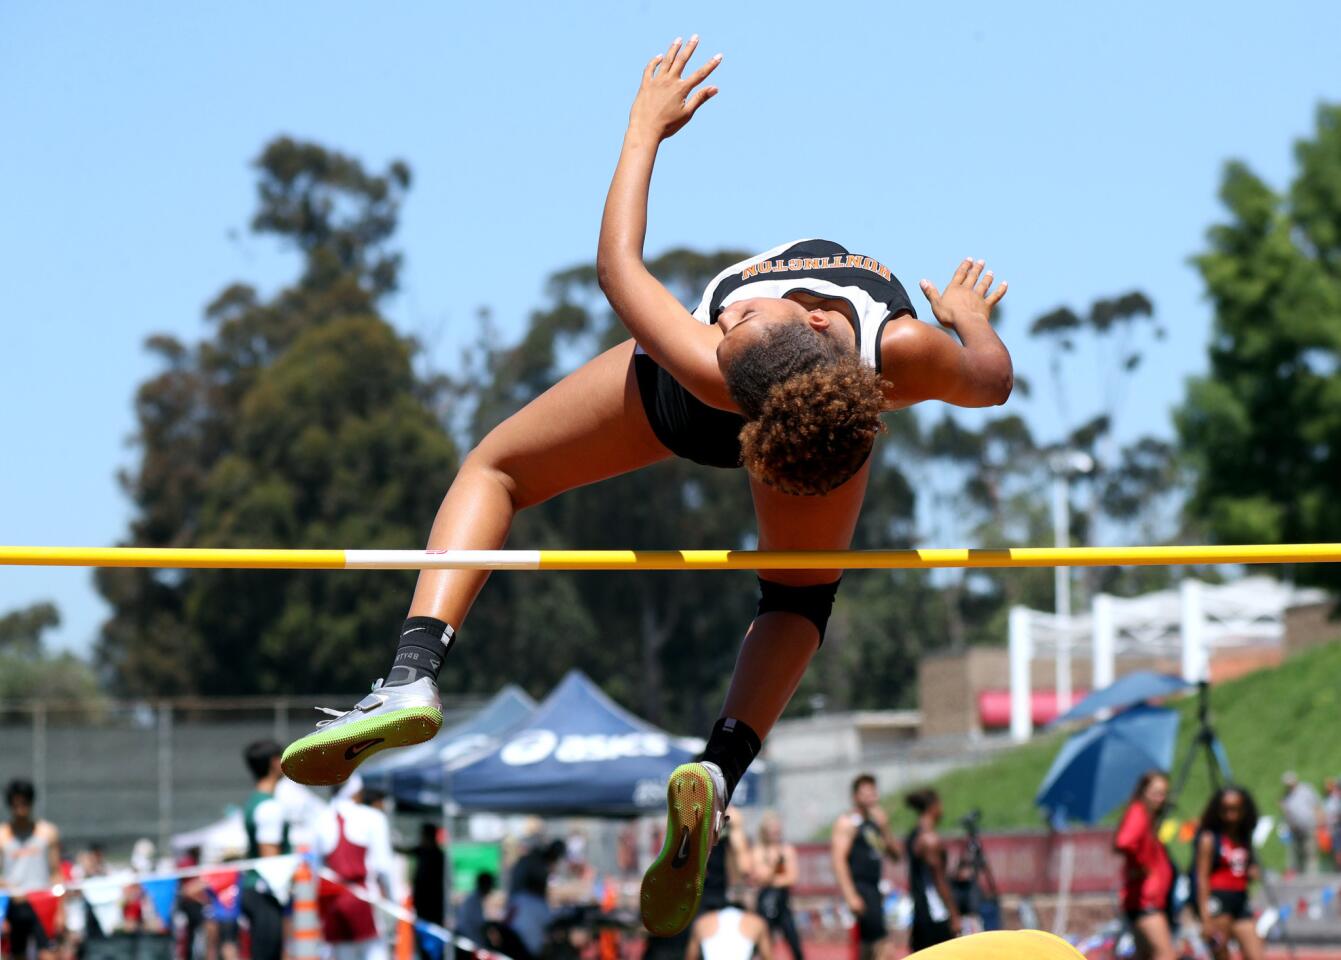 Huntington Beach High School high jumper Xolani Hodel clears the bar early in competition at the Orange County Track and Field Championships, at Mission Viejo High School, in Mission Viejo on Saturday, April 13, 2019.